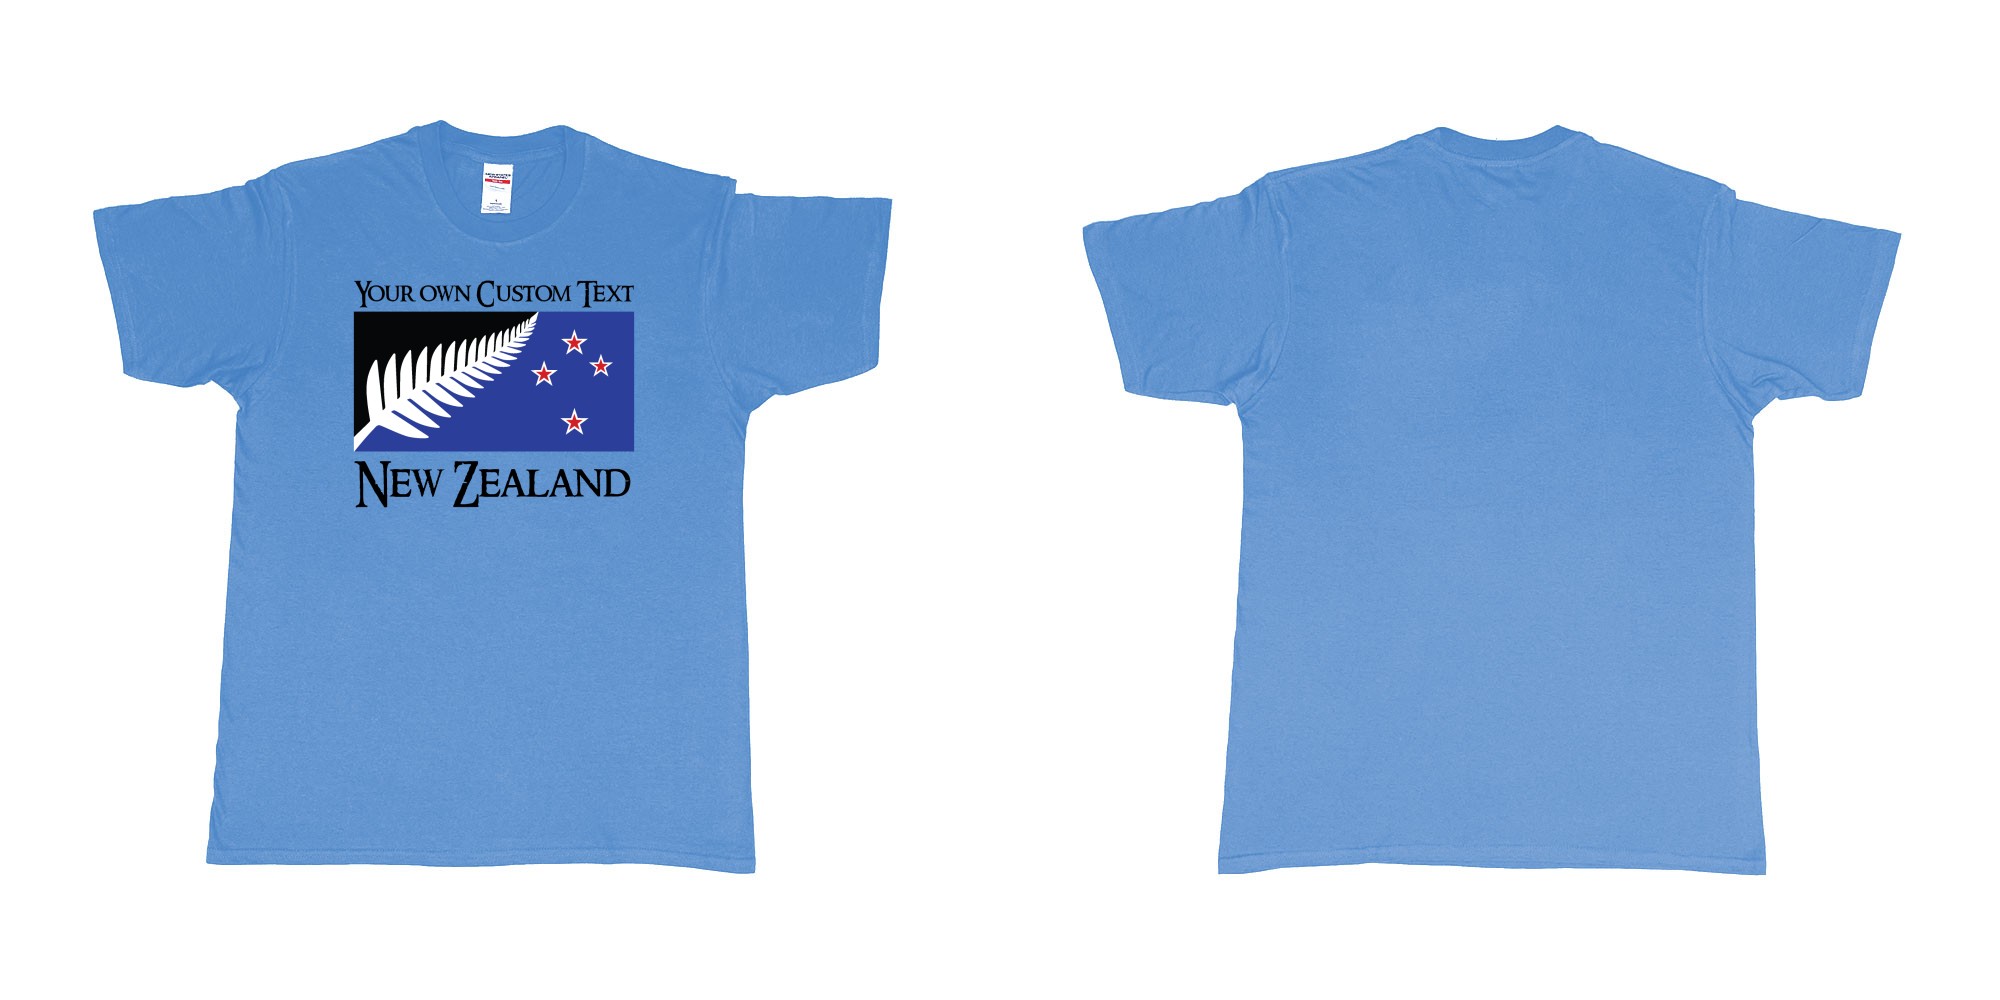 Custom tshirt design new zealand silver fern flag in fabric color carolina-blue choice your own text made in Bali by The Pirate Way